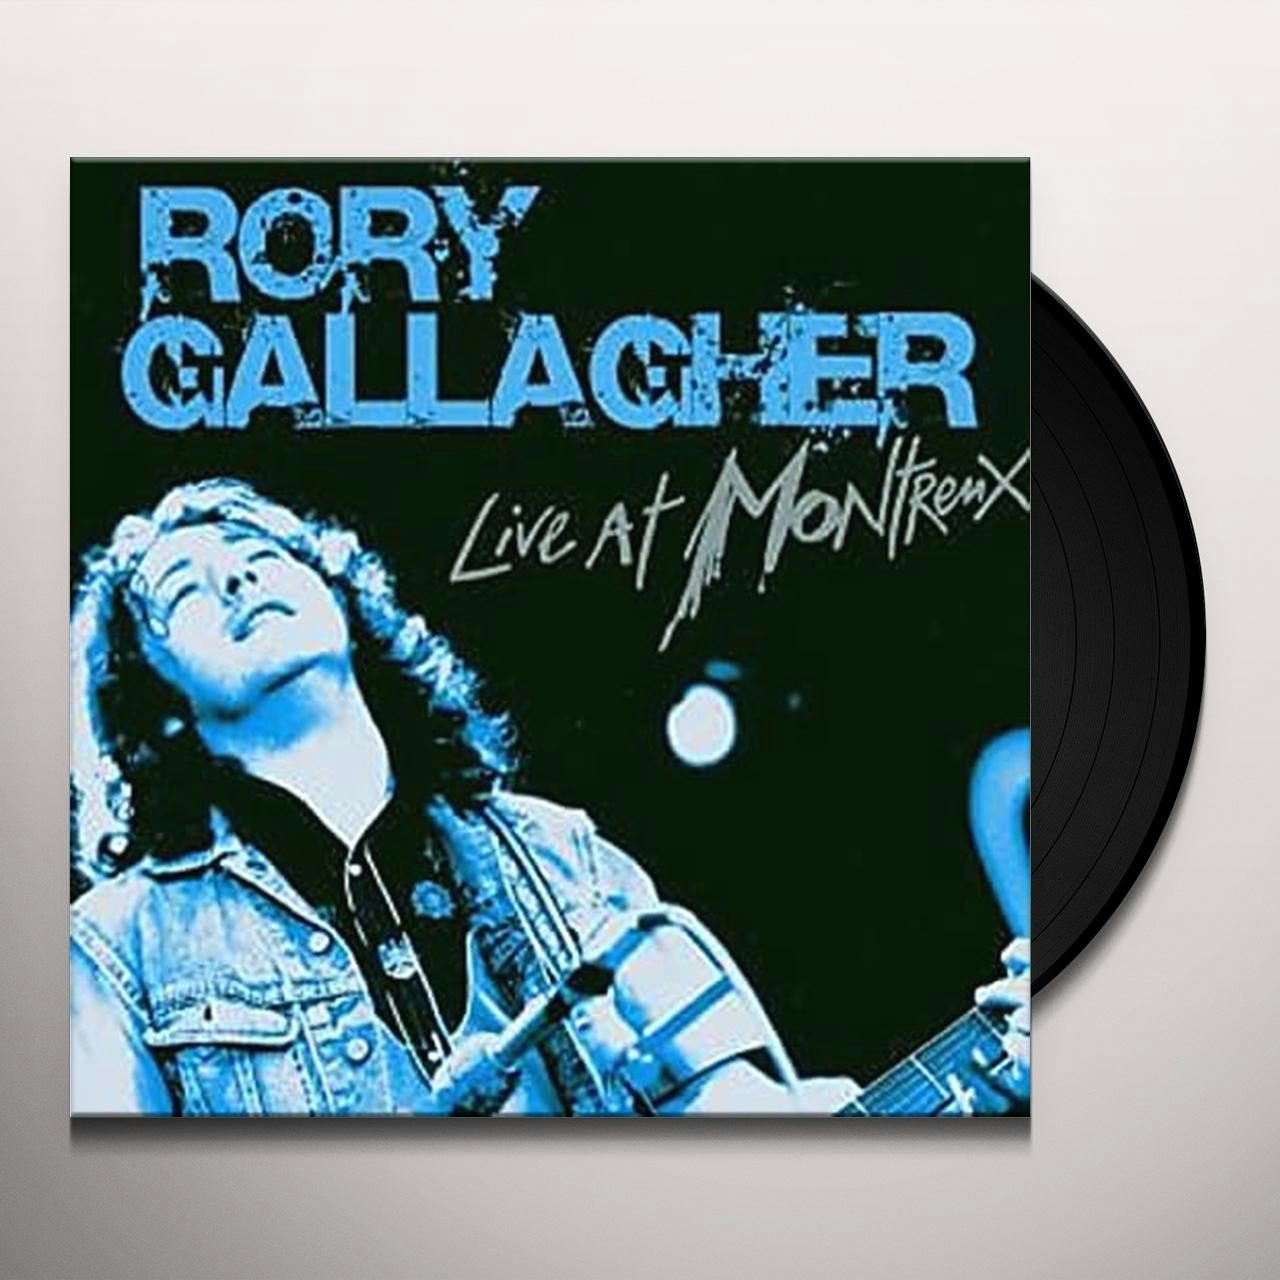 Live At Montreux Vinyl Record - Rory Gallagher